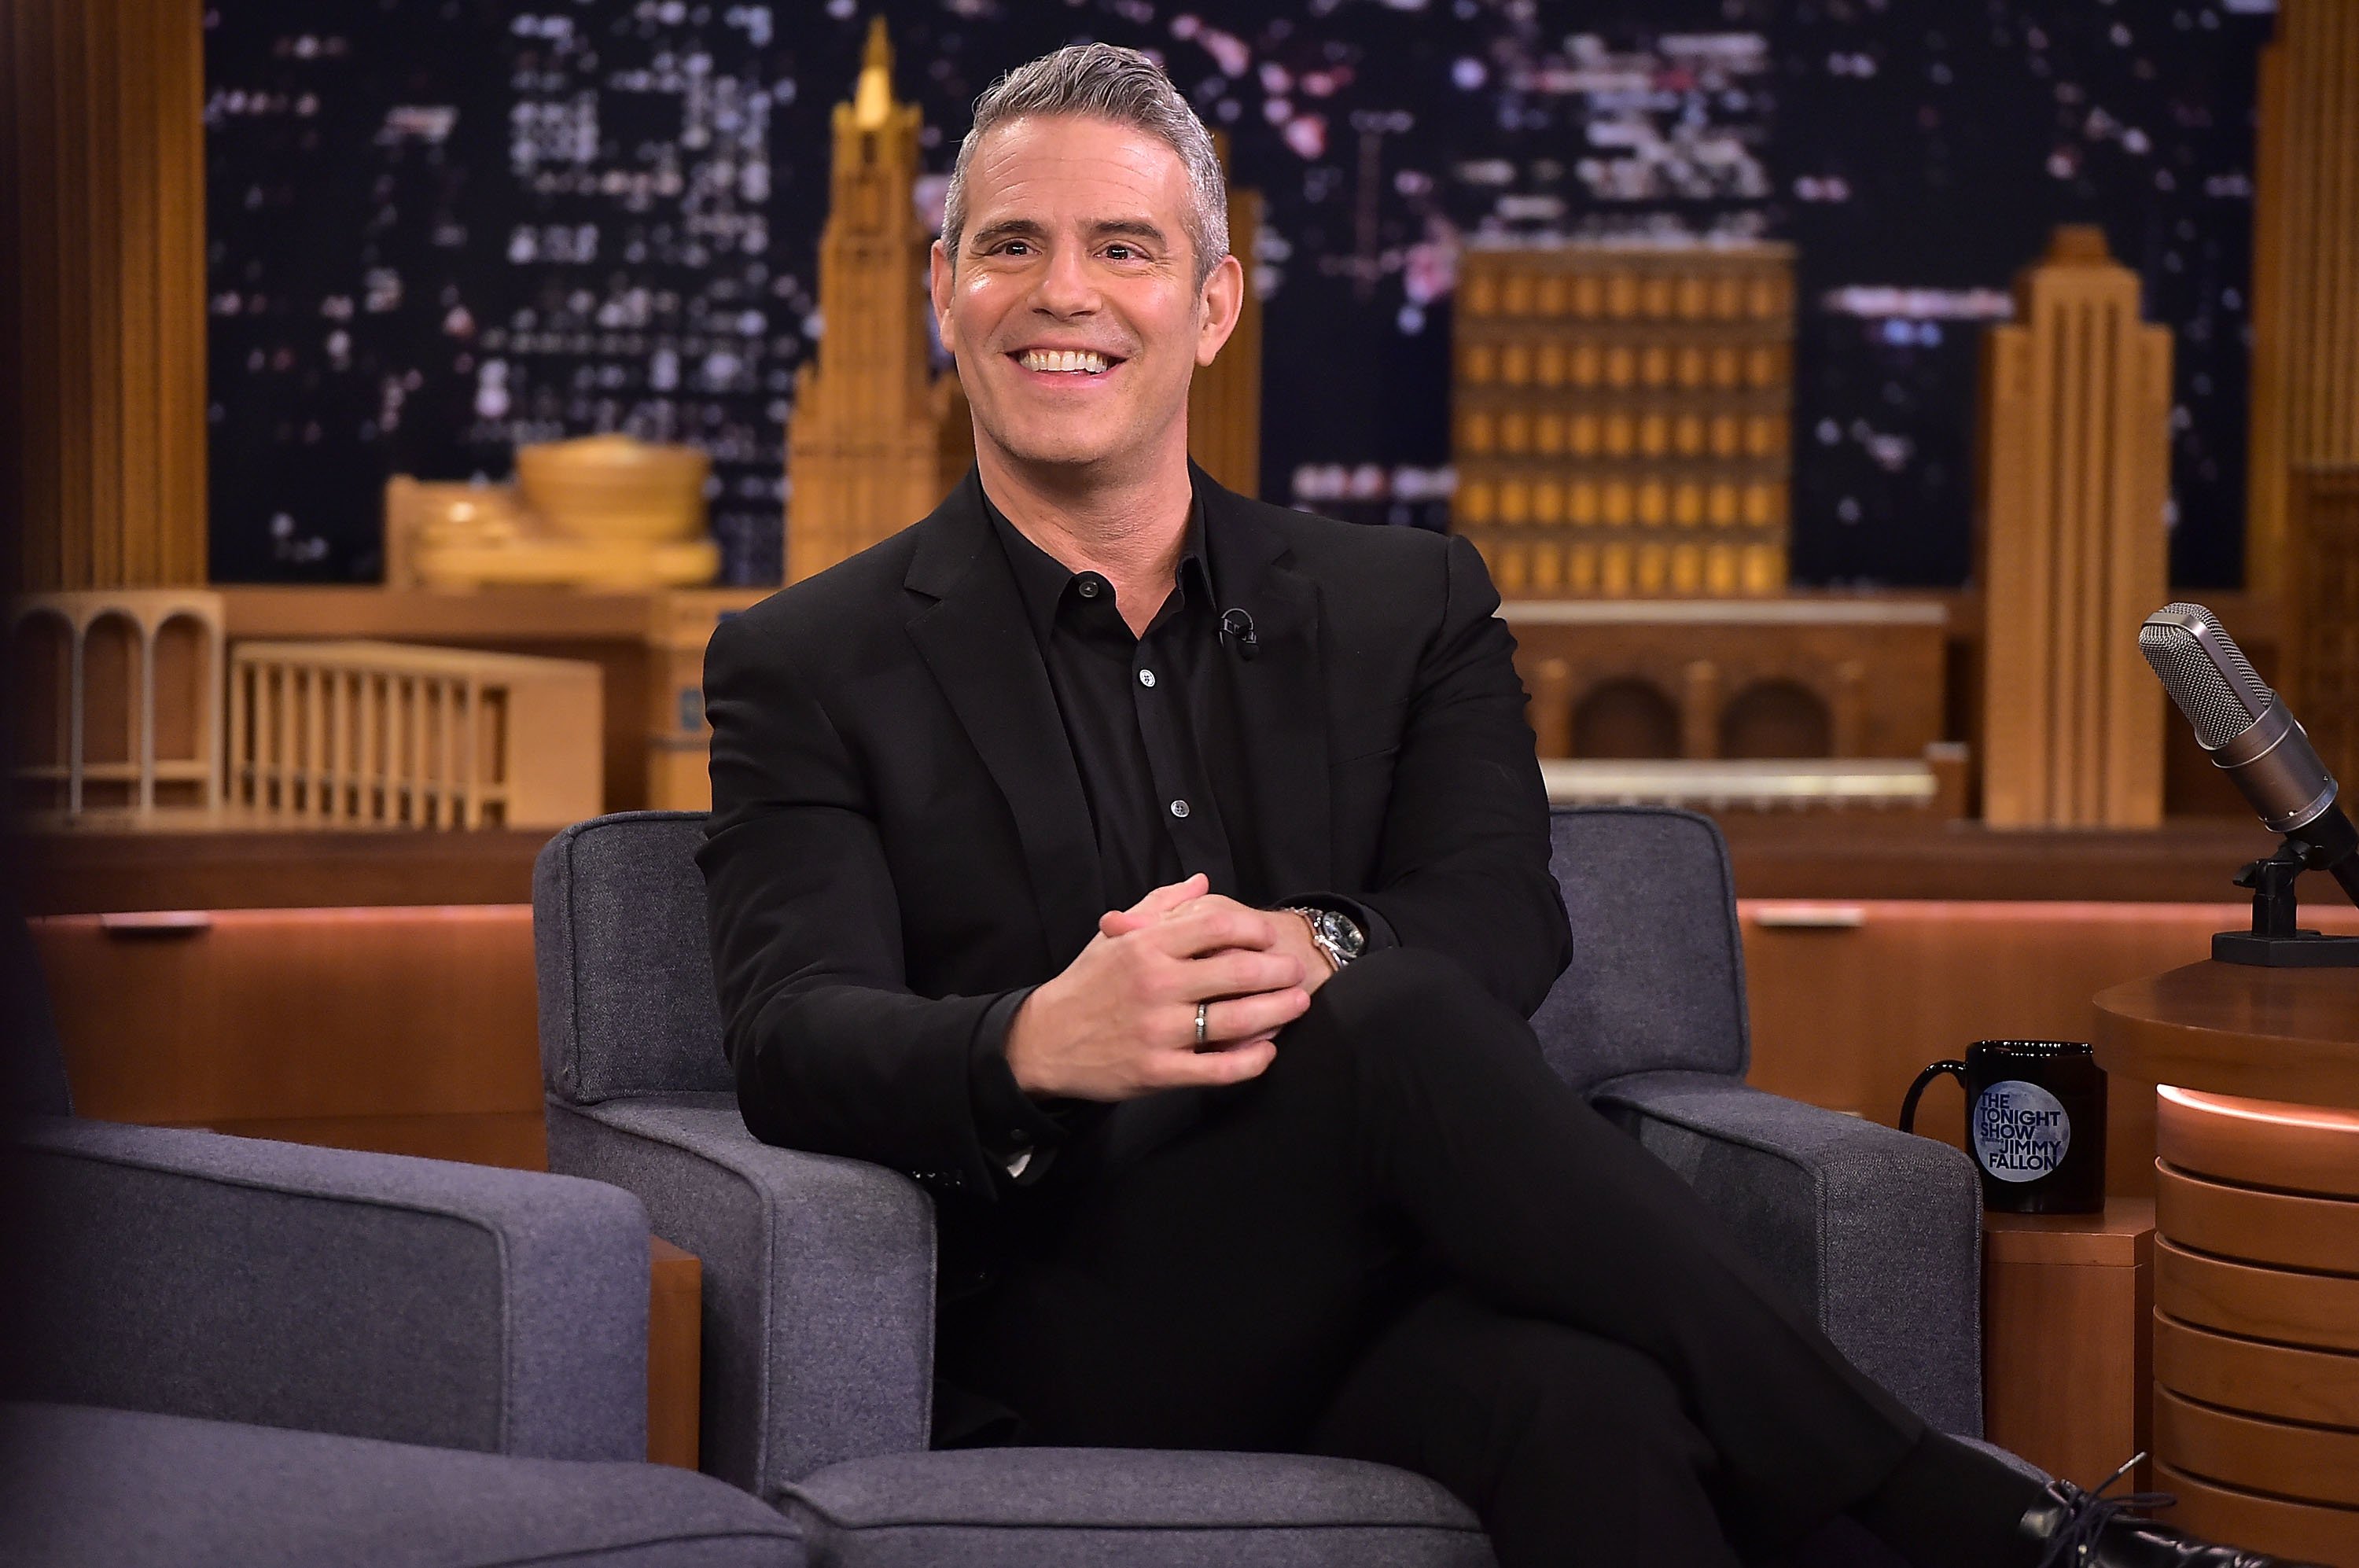 Andy Cohen visits "The Tonight Show Starring Jimmy Fallon" in New York City on December 5, 2018. | Photo: Getty Images